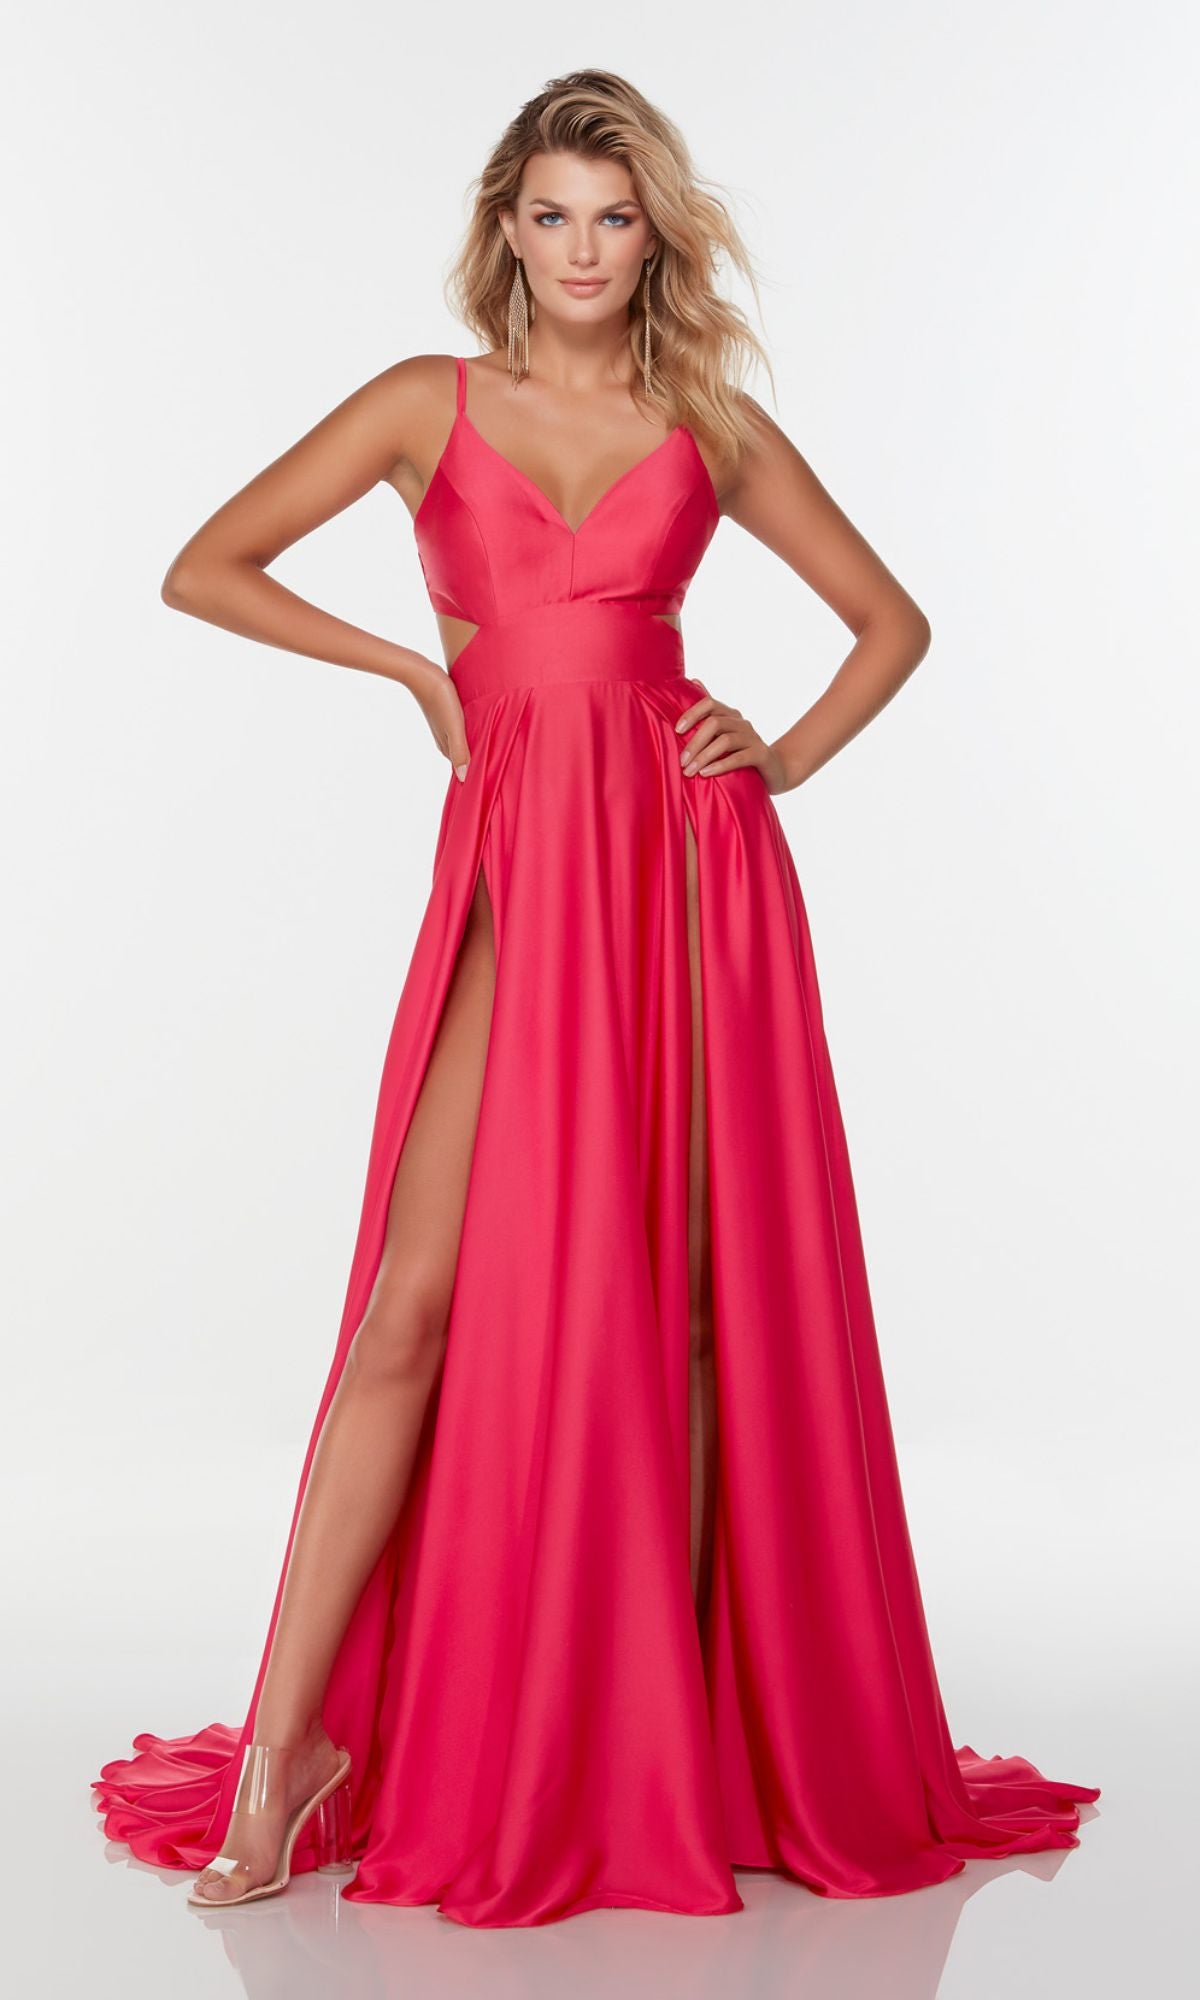 Alyce Bright Hot Pink Prom Dress with Double Slits